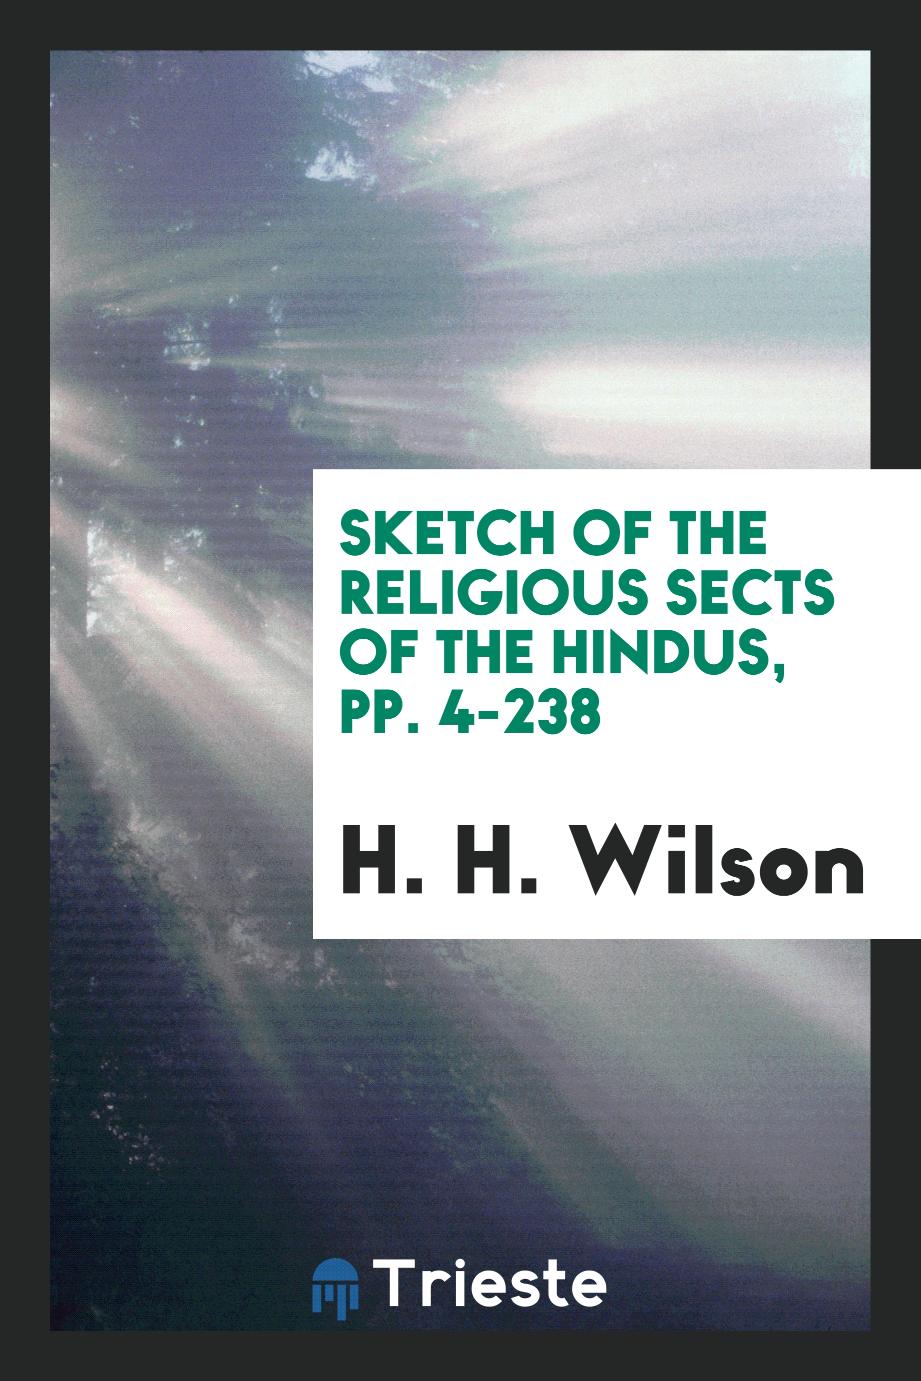 Sketch of the Religious Sects of the Hindus, pp. 4-238